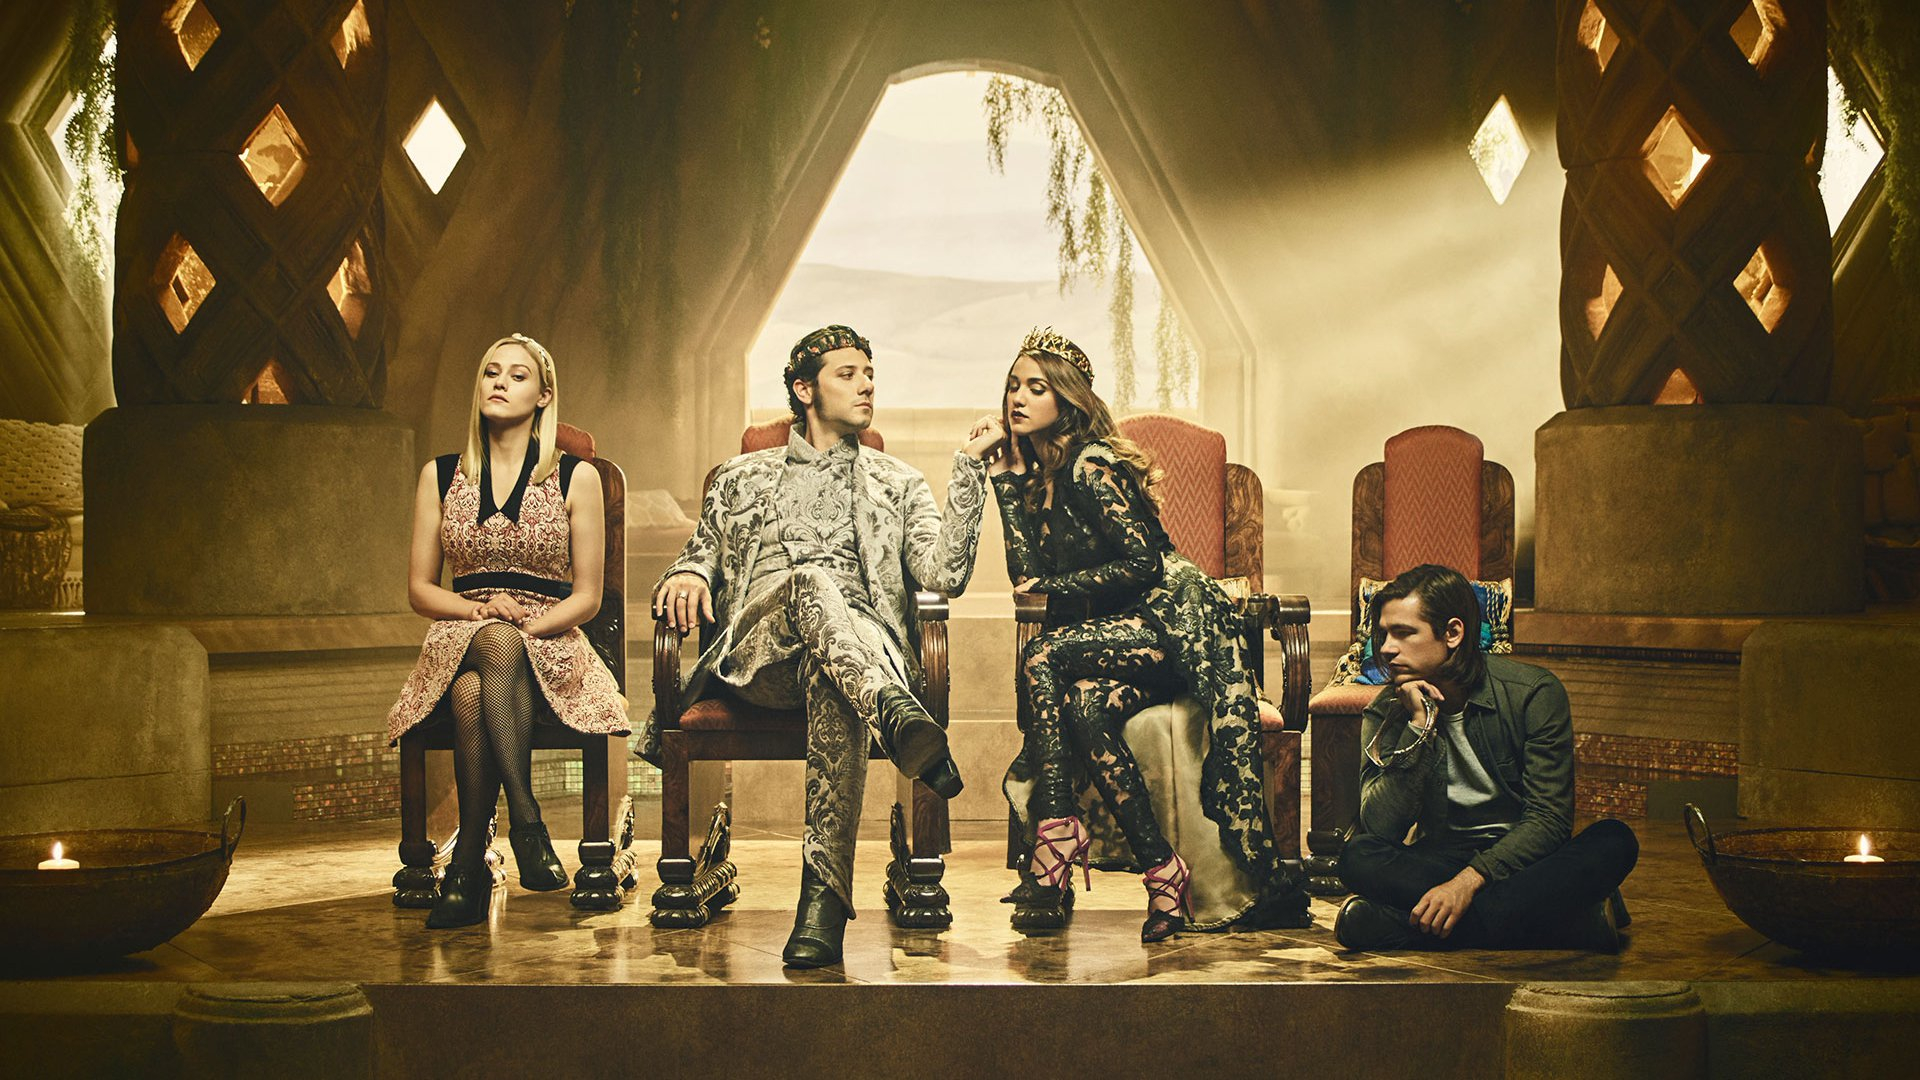 1920x1080 10+ The Magicians HD Wallpapers and Backgrounds